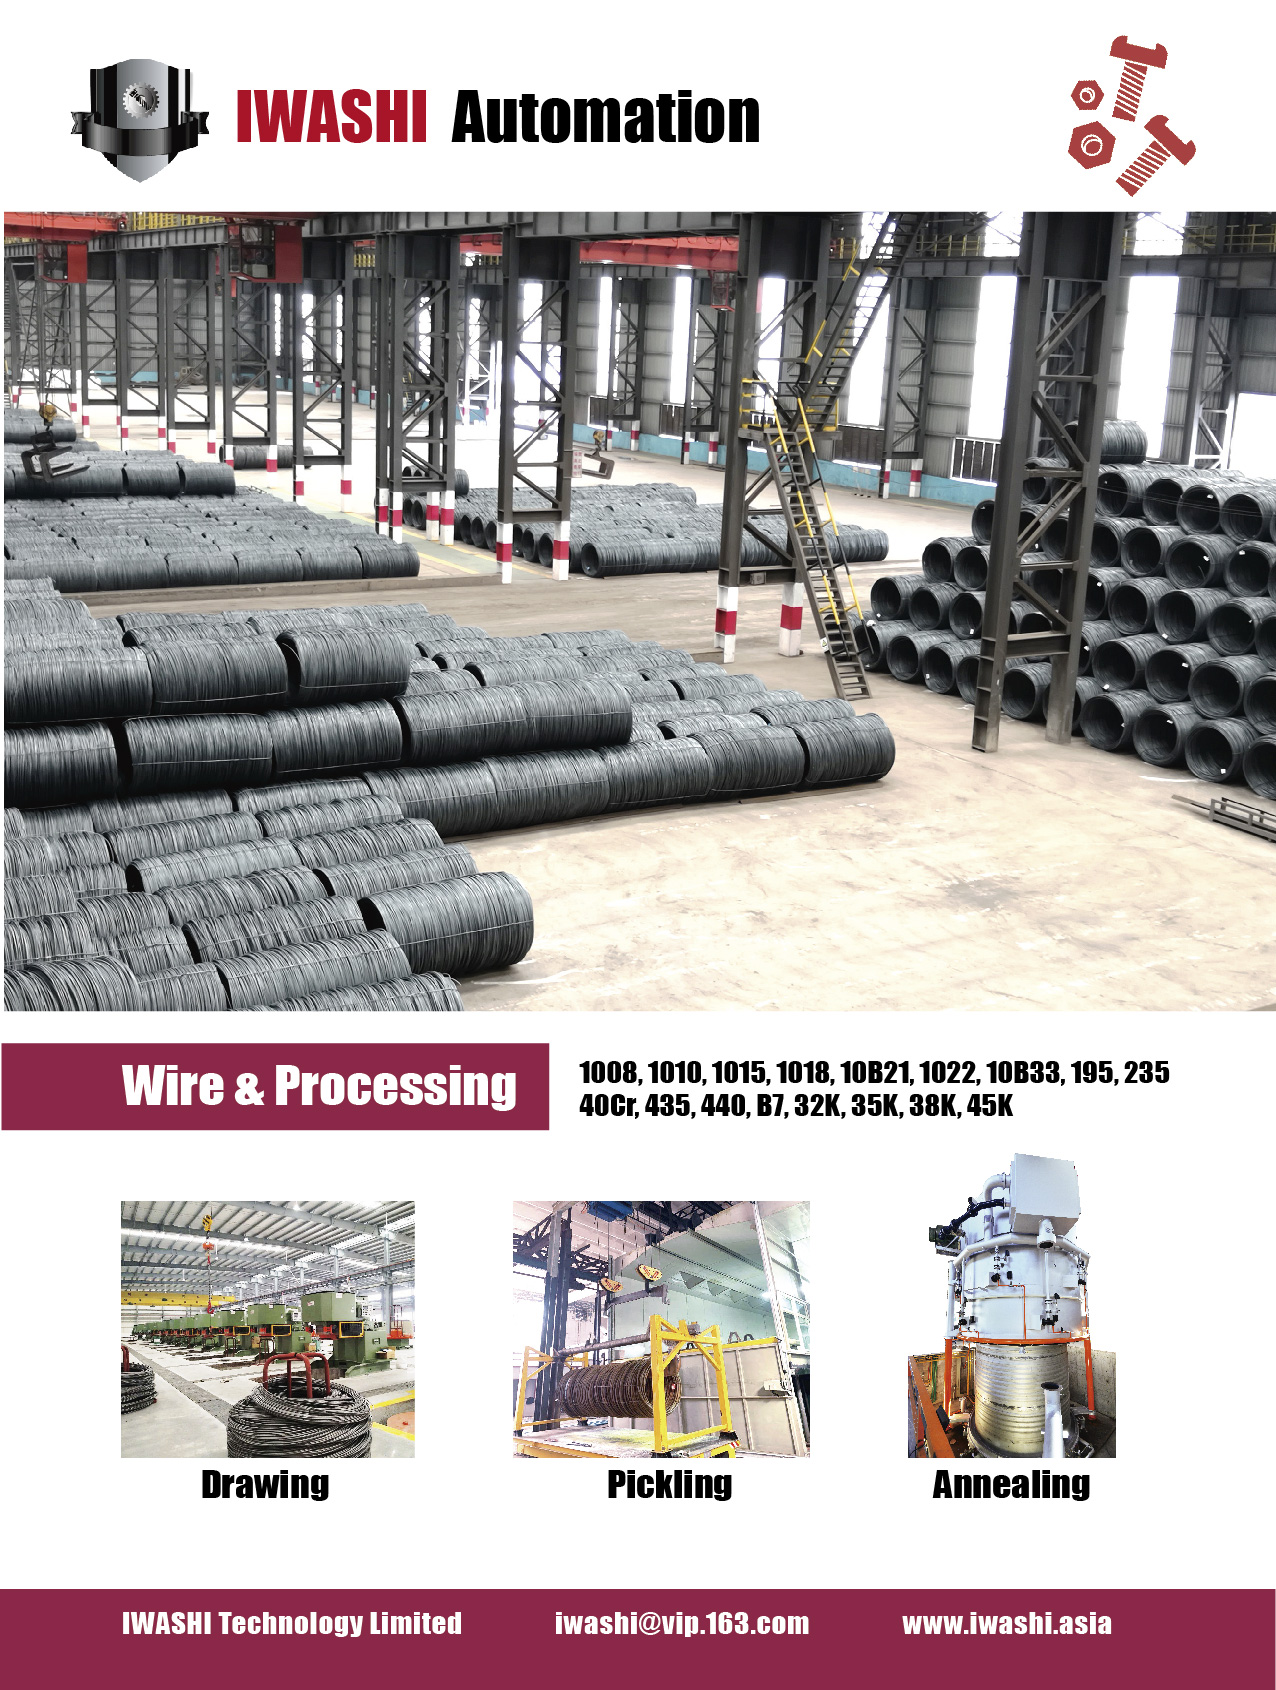 IWASHI TECHNOLOGY LIMITED , Wire & Processing Equipment: Drawing Machine, Pickling Equipment, Wire Furnace / Cold Heading Steel, Spring Steel, Bearing Steel, Tools Steel / Fasteners, Railroad / Metro-Bolts / Nuts / Clips